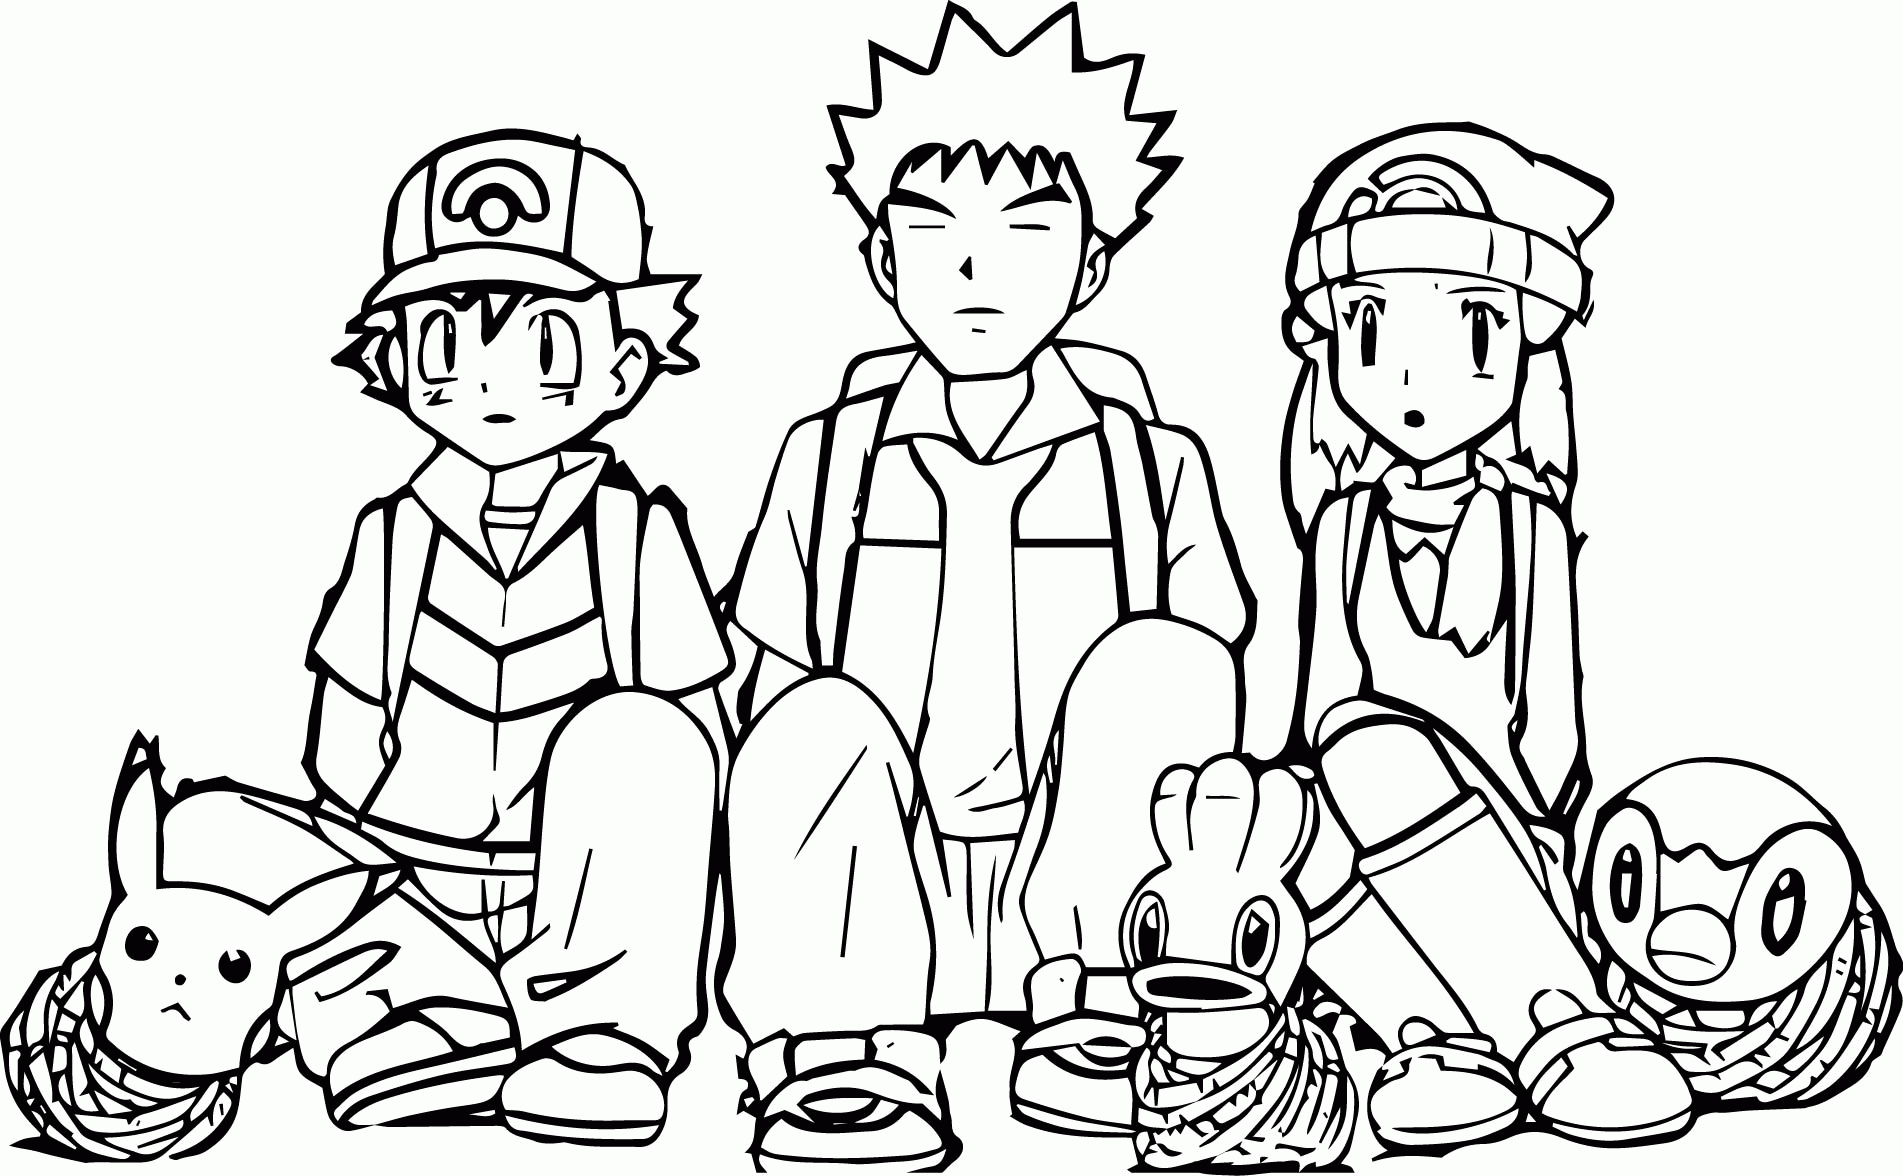 Ash Pokemon Coloring Page Free Coloring Page Porn Sex Picture 